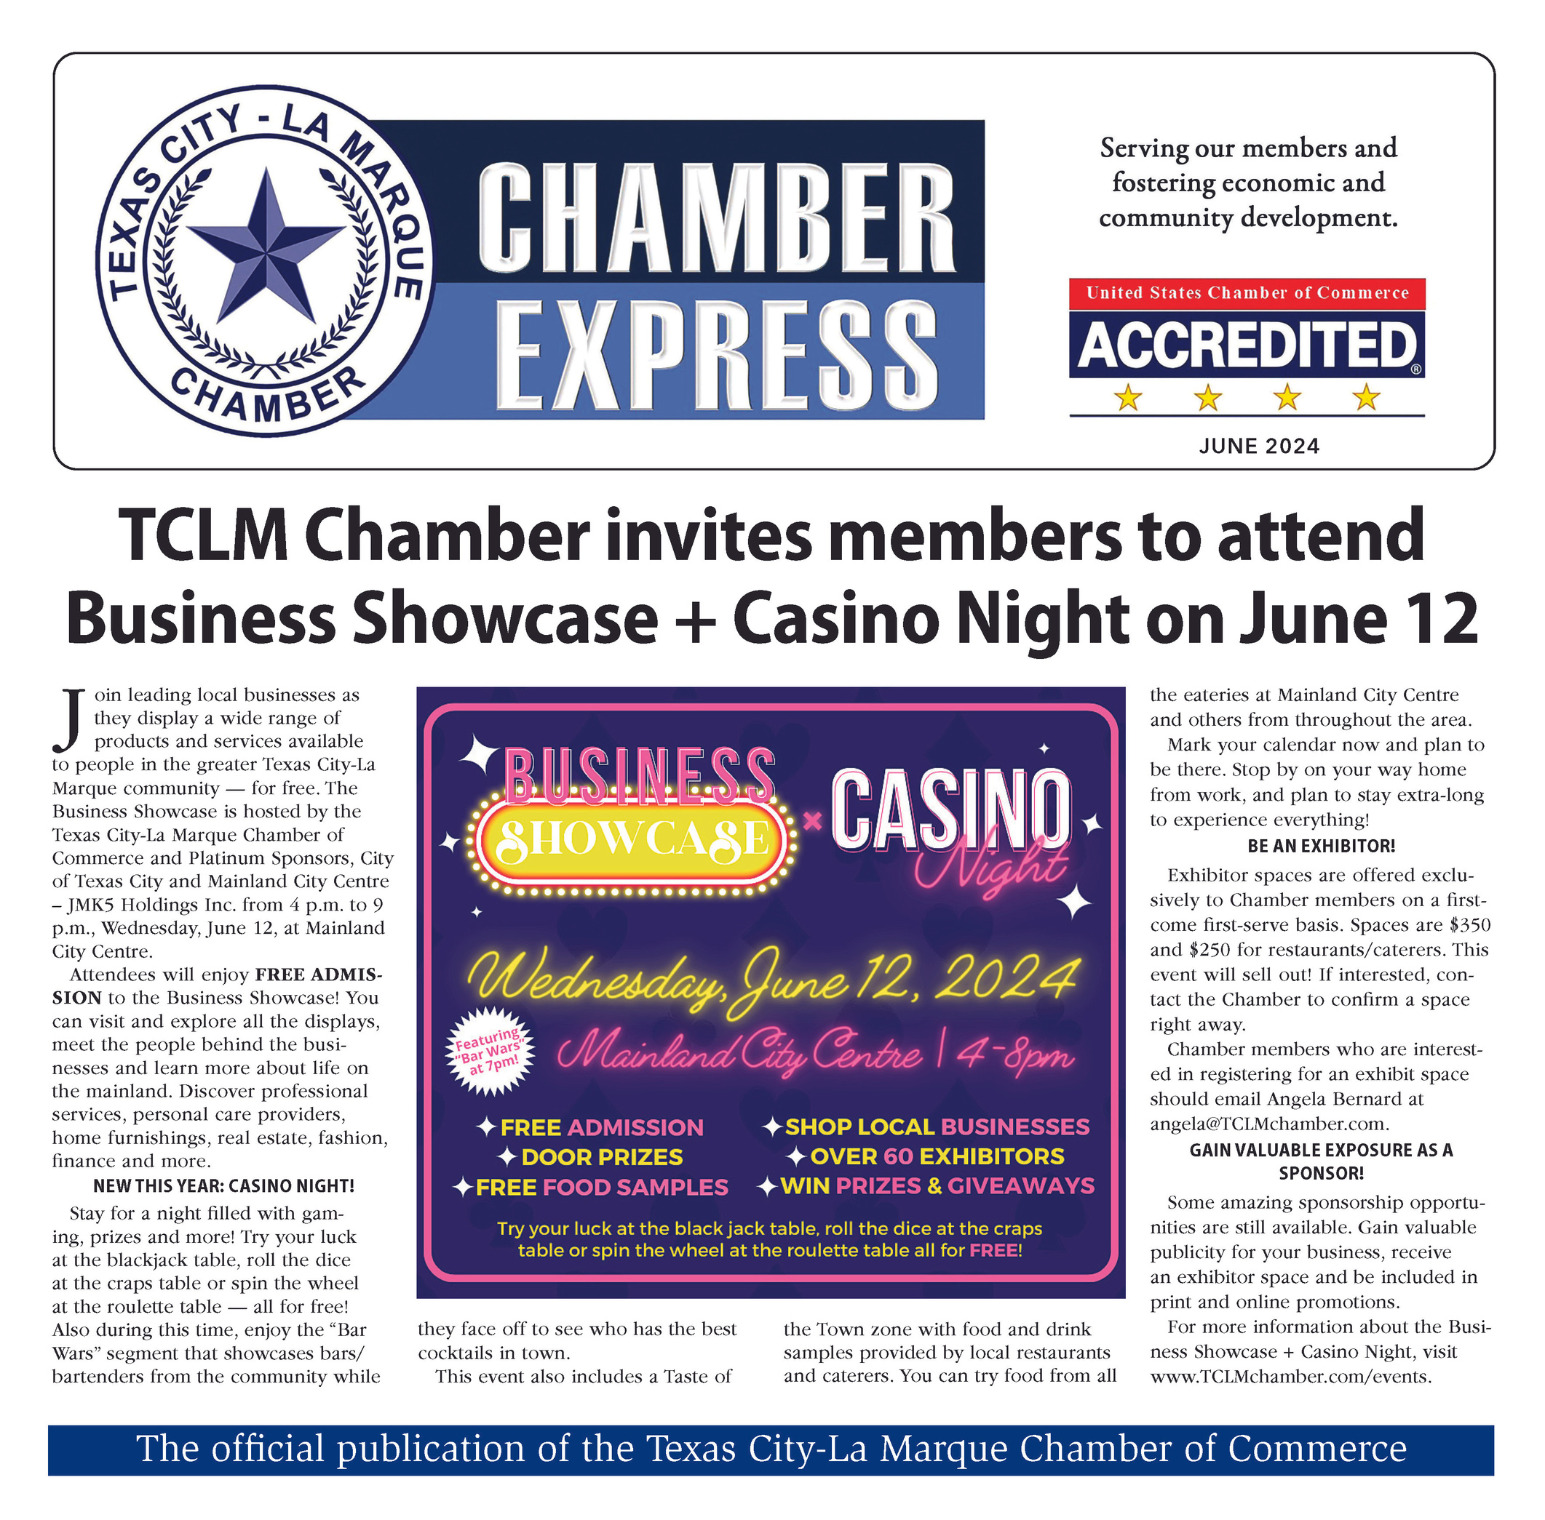 TCLM Chamber Express June 2024_Page_01.2